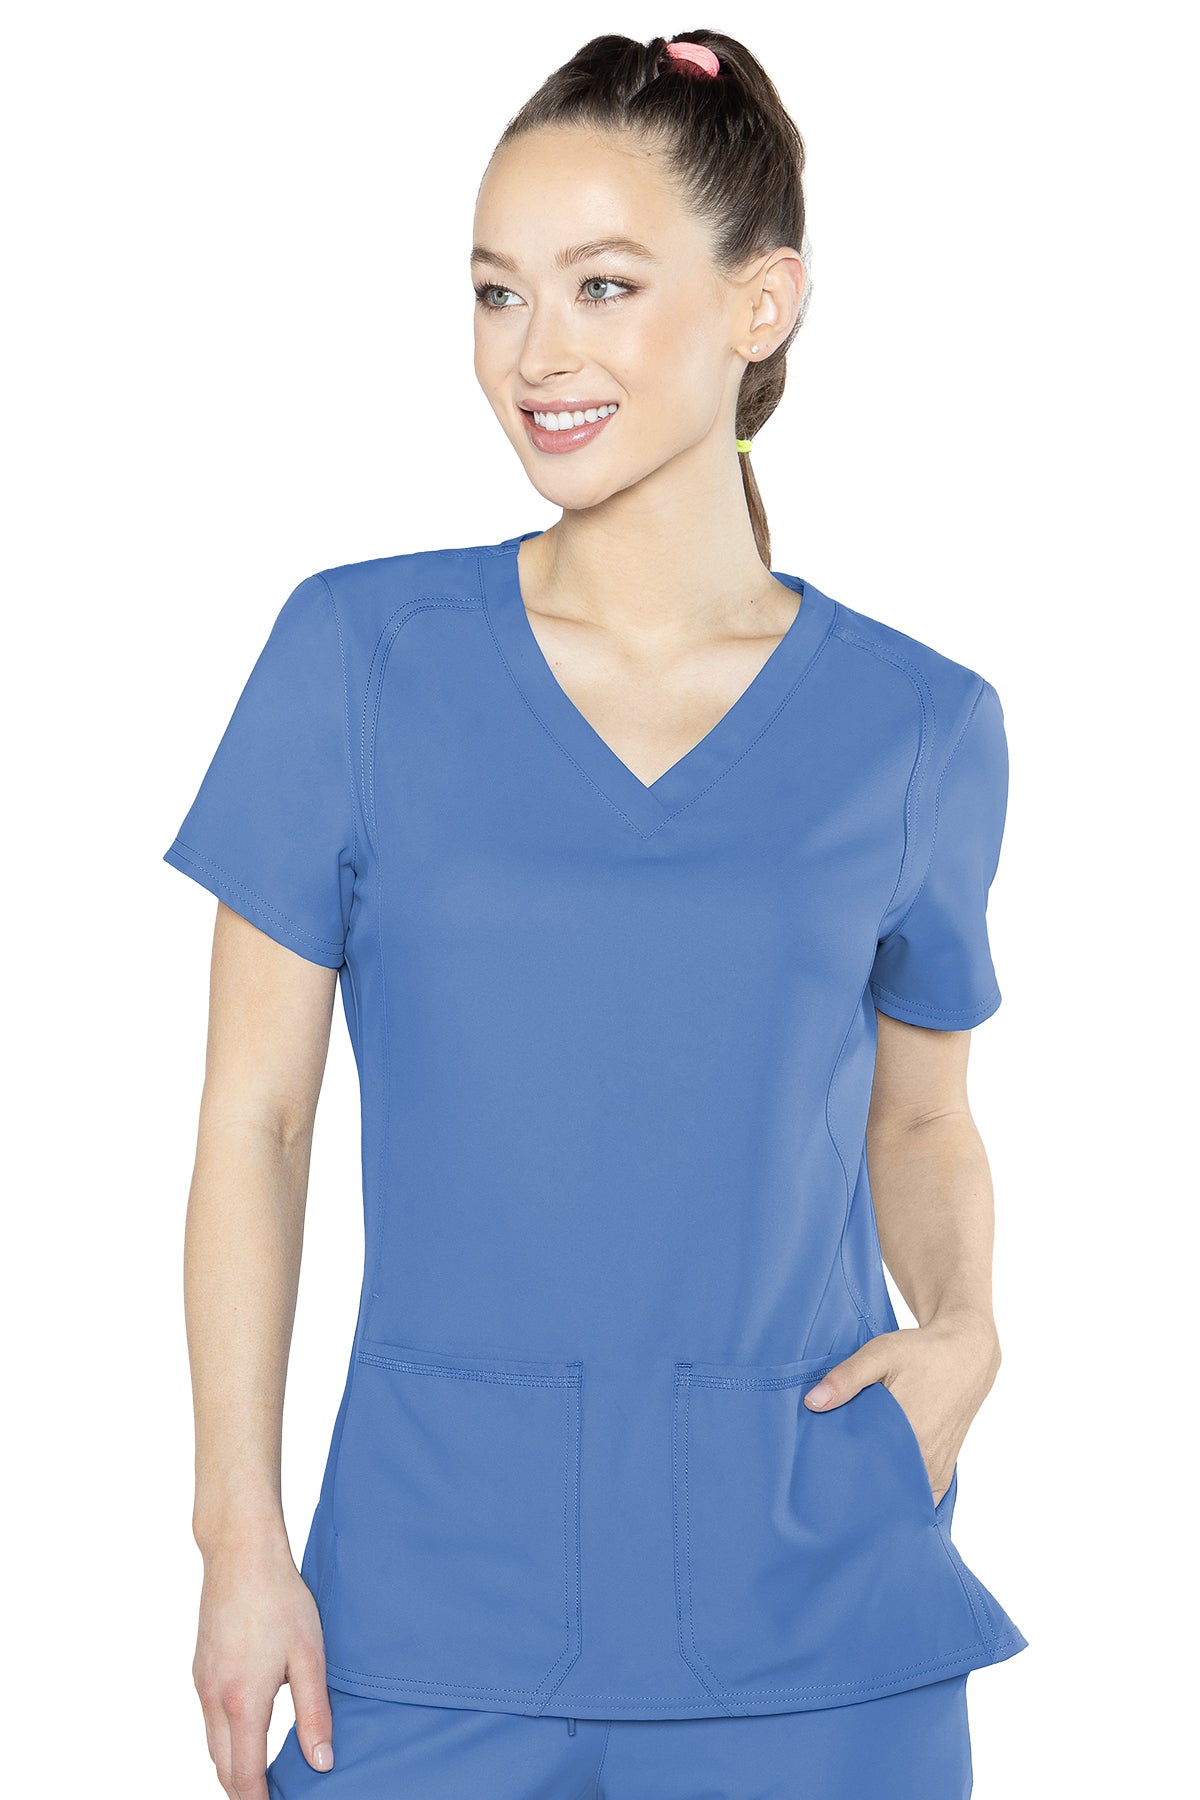 Med Couture Scrub Top Insight Classic V-Neck Side Pocket in Ceil at Parker's Clothing and Shoes.